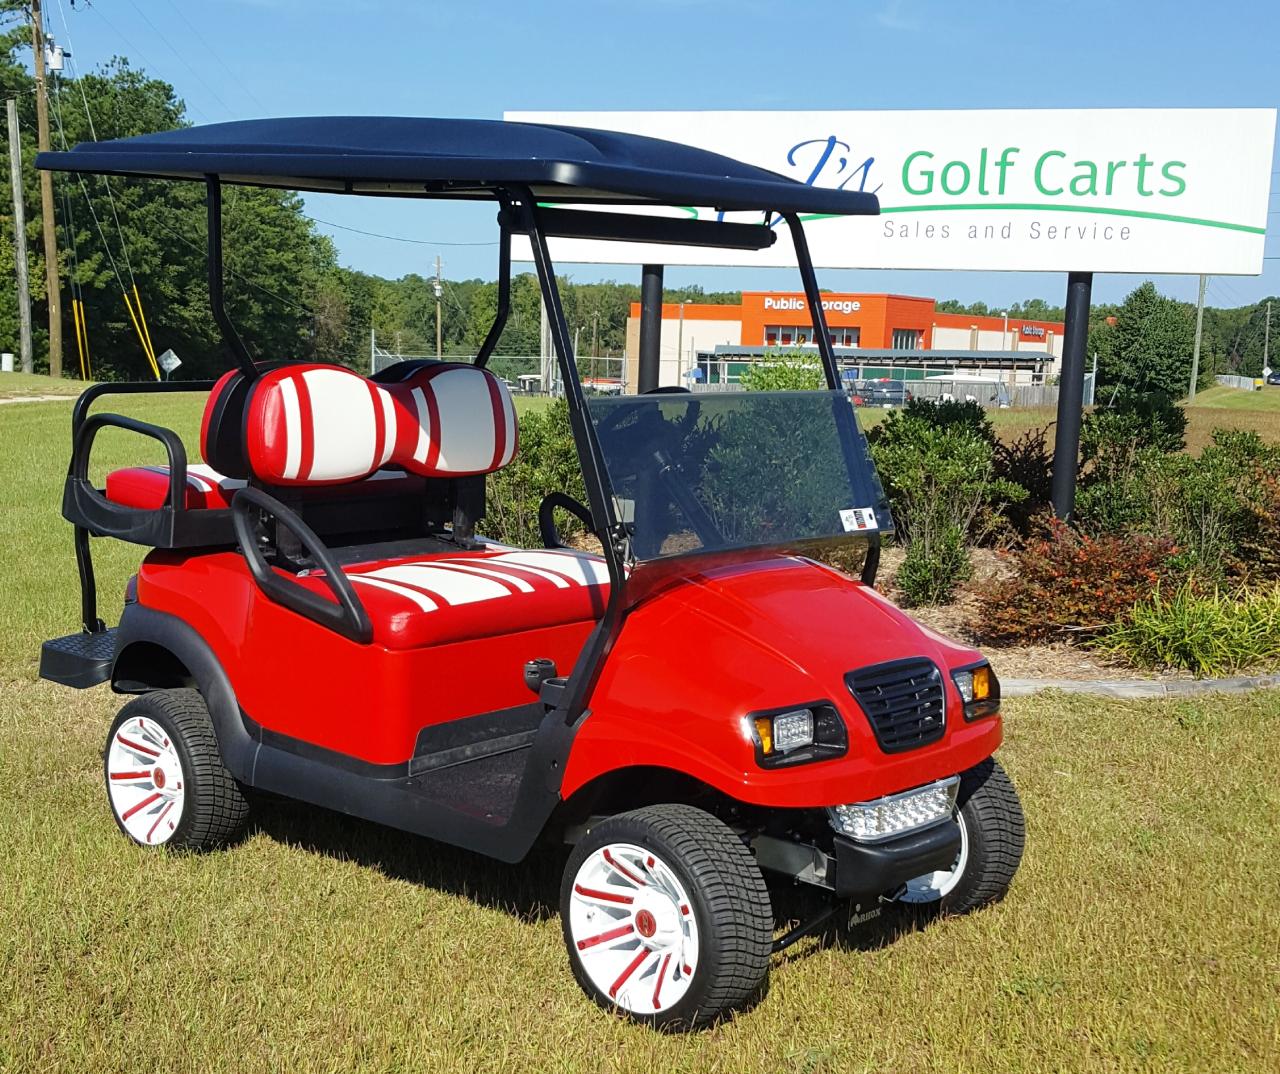 Used Golf Carts for Sale by Owner in Yoakum, Texas: Find Your Perfect Ride Today!